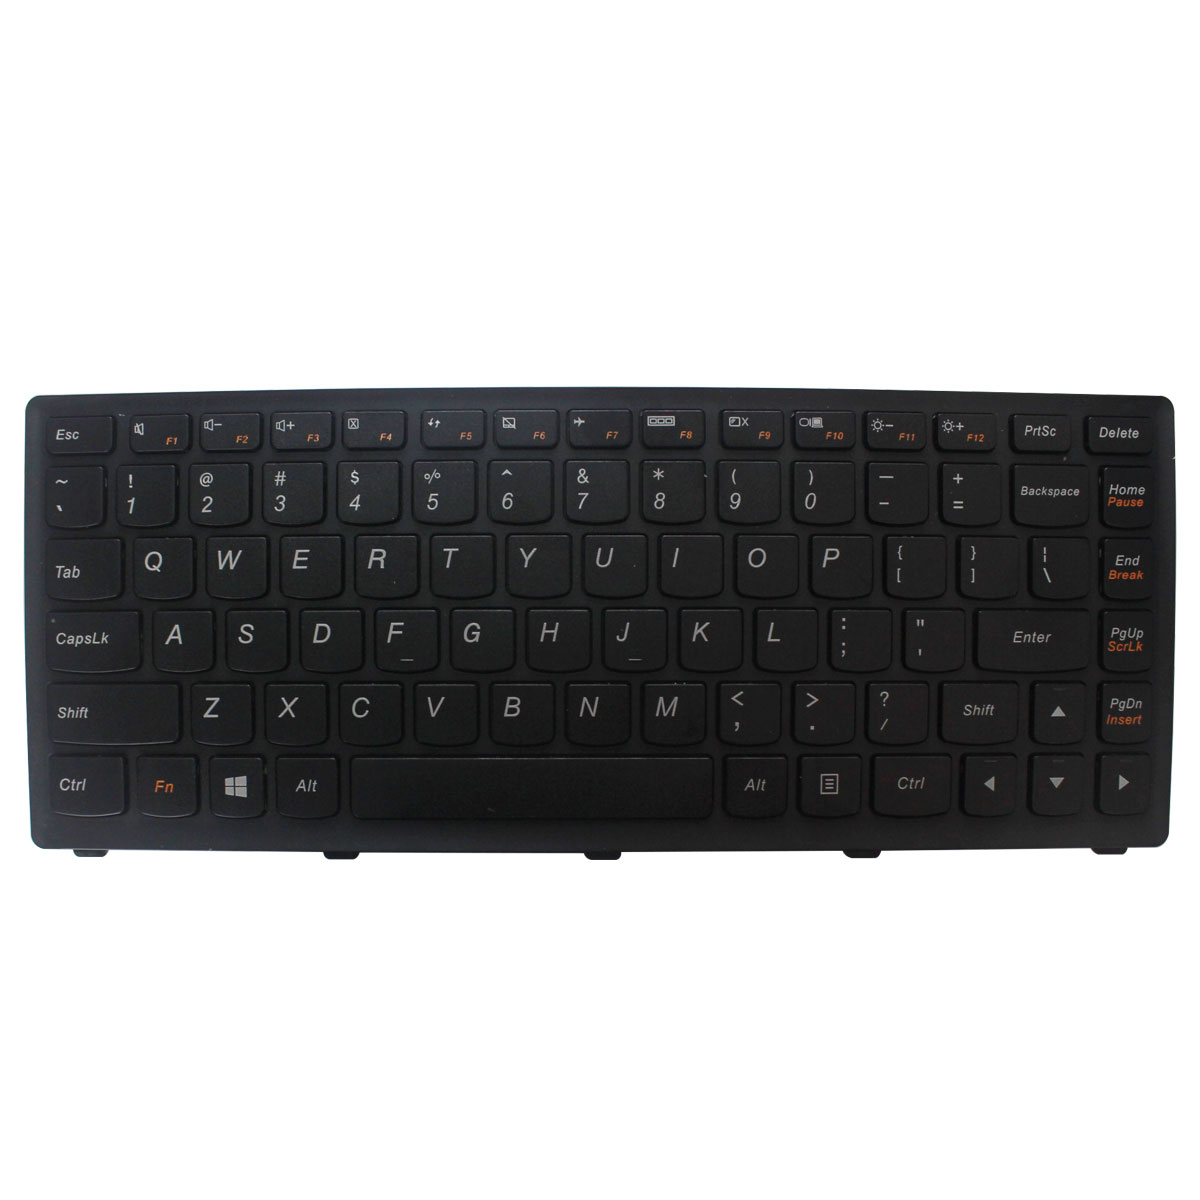 Compatible laptop keyboard for Ideapad S300 S400 S405 S410 S415